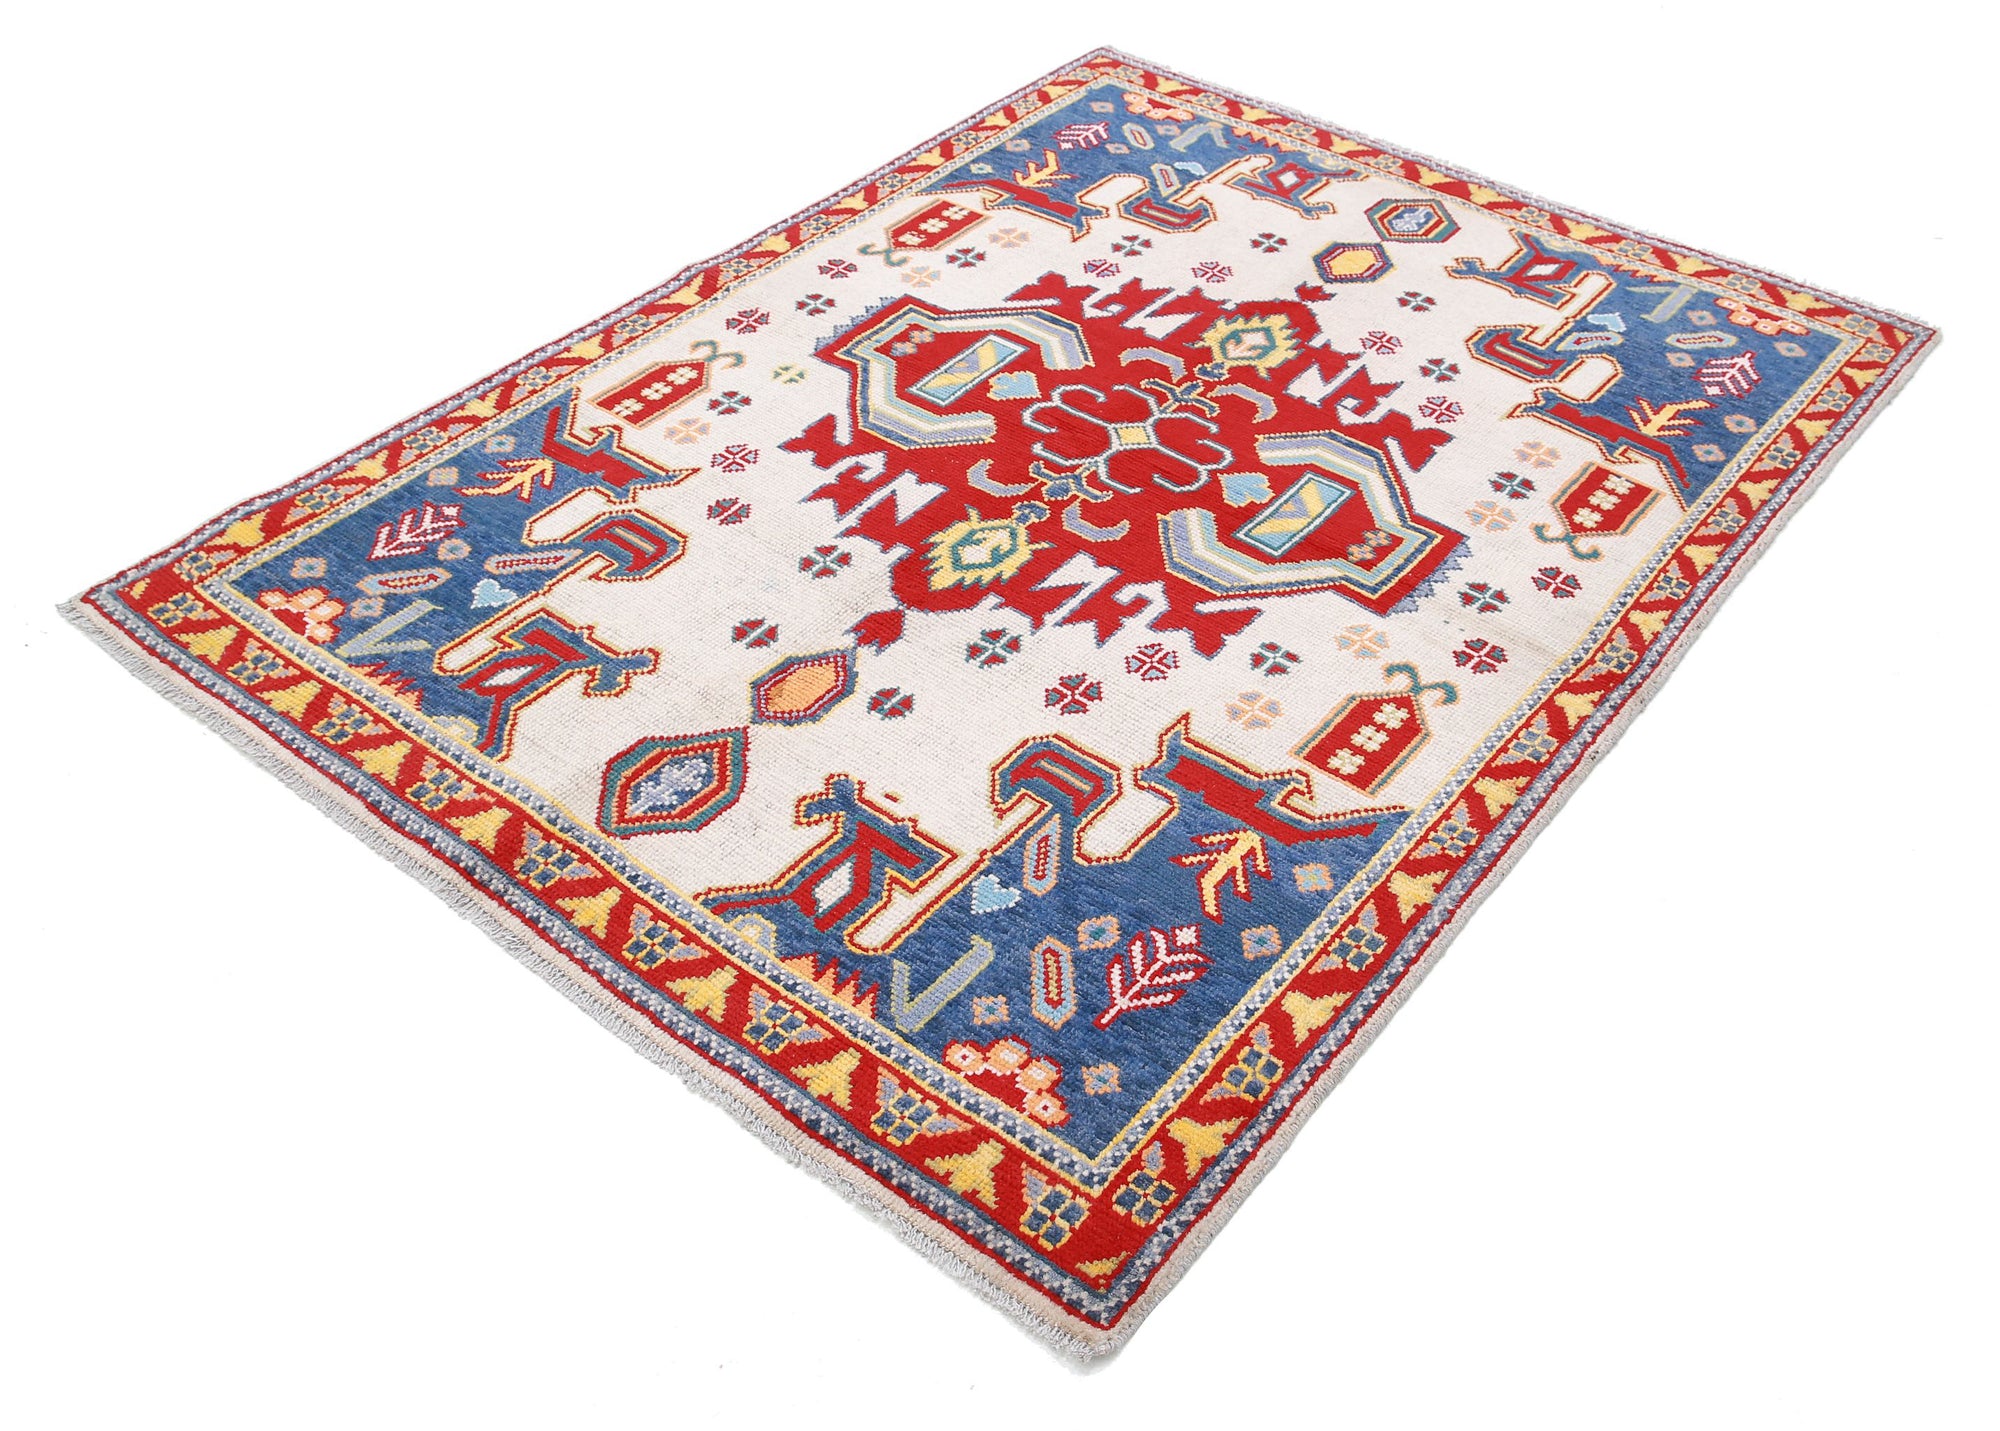 Revival-hand-knotted-qarghani-wool-rug-5014218-2.jpg